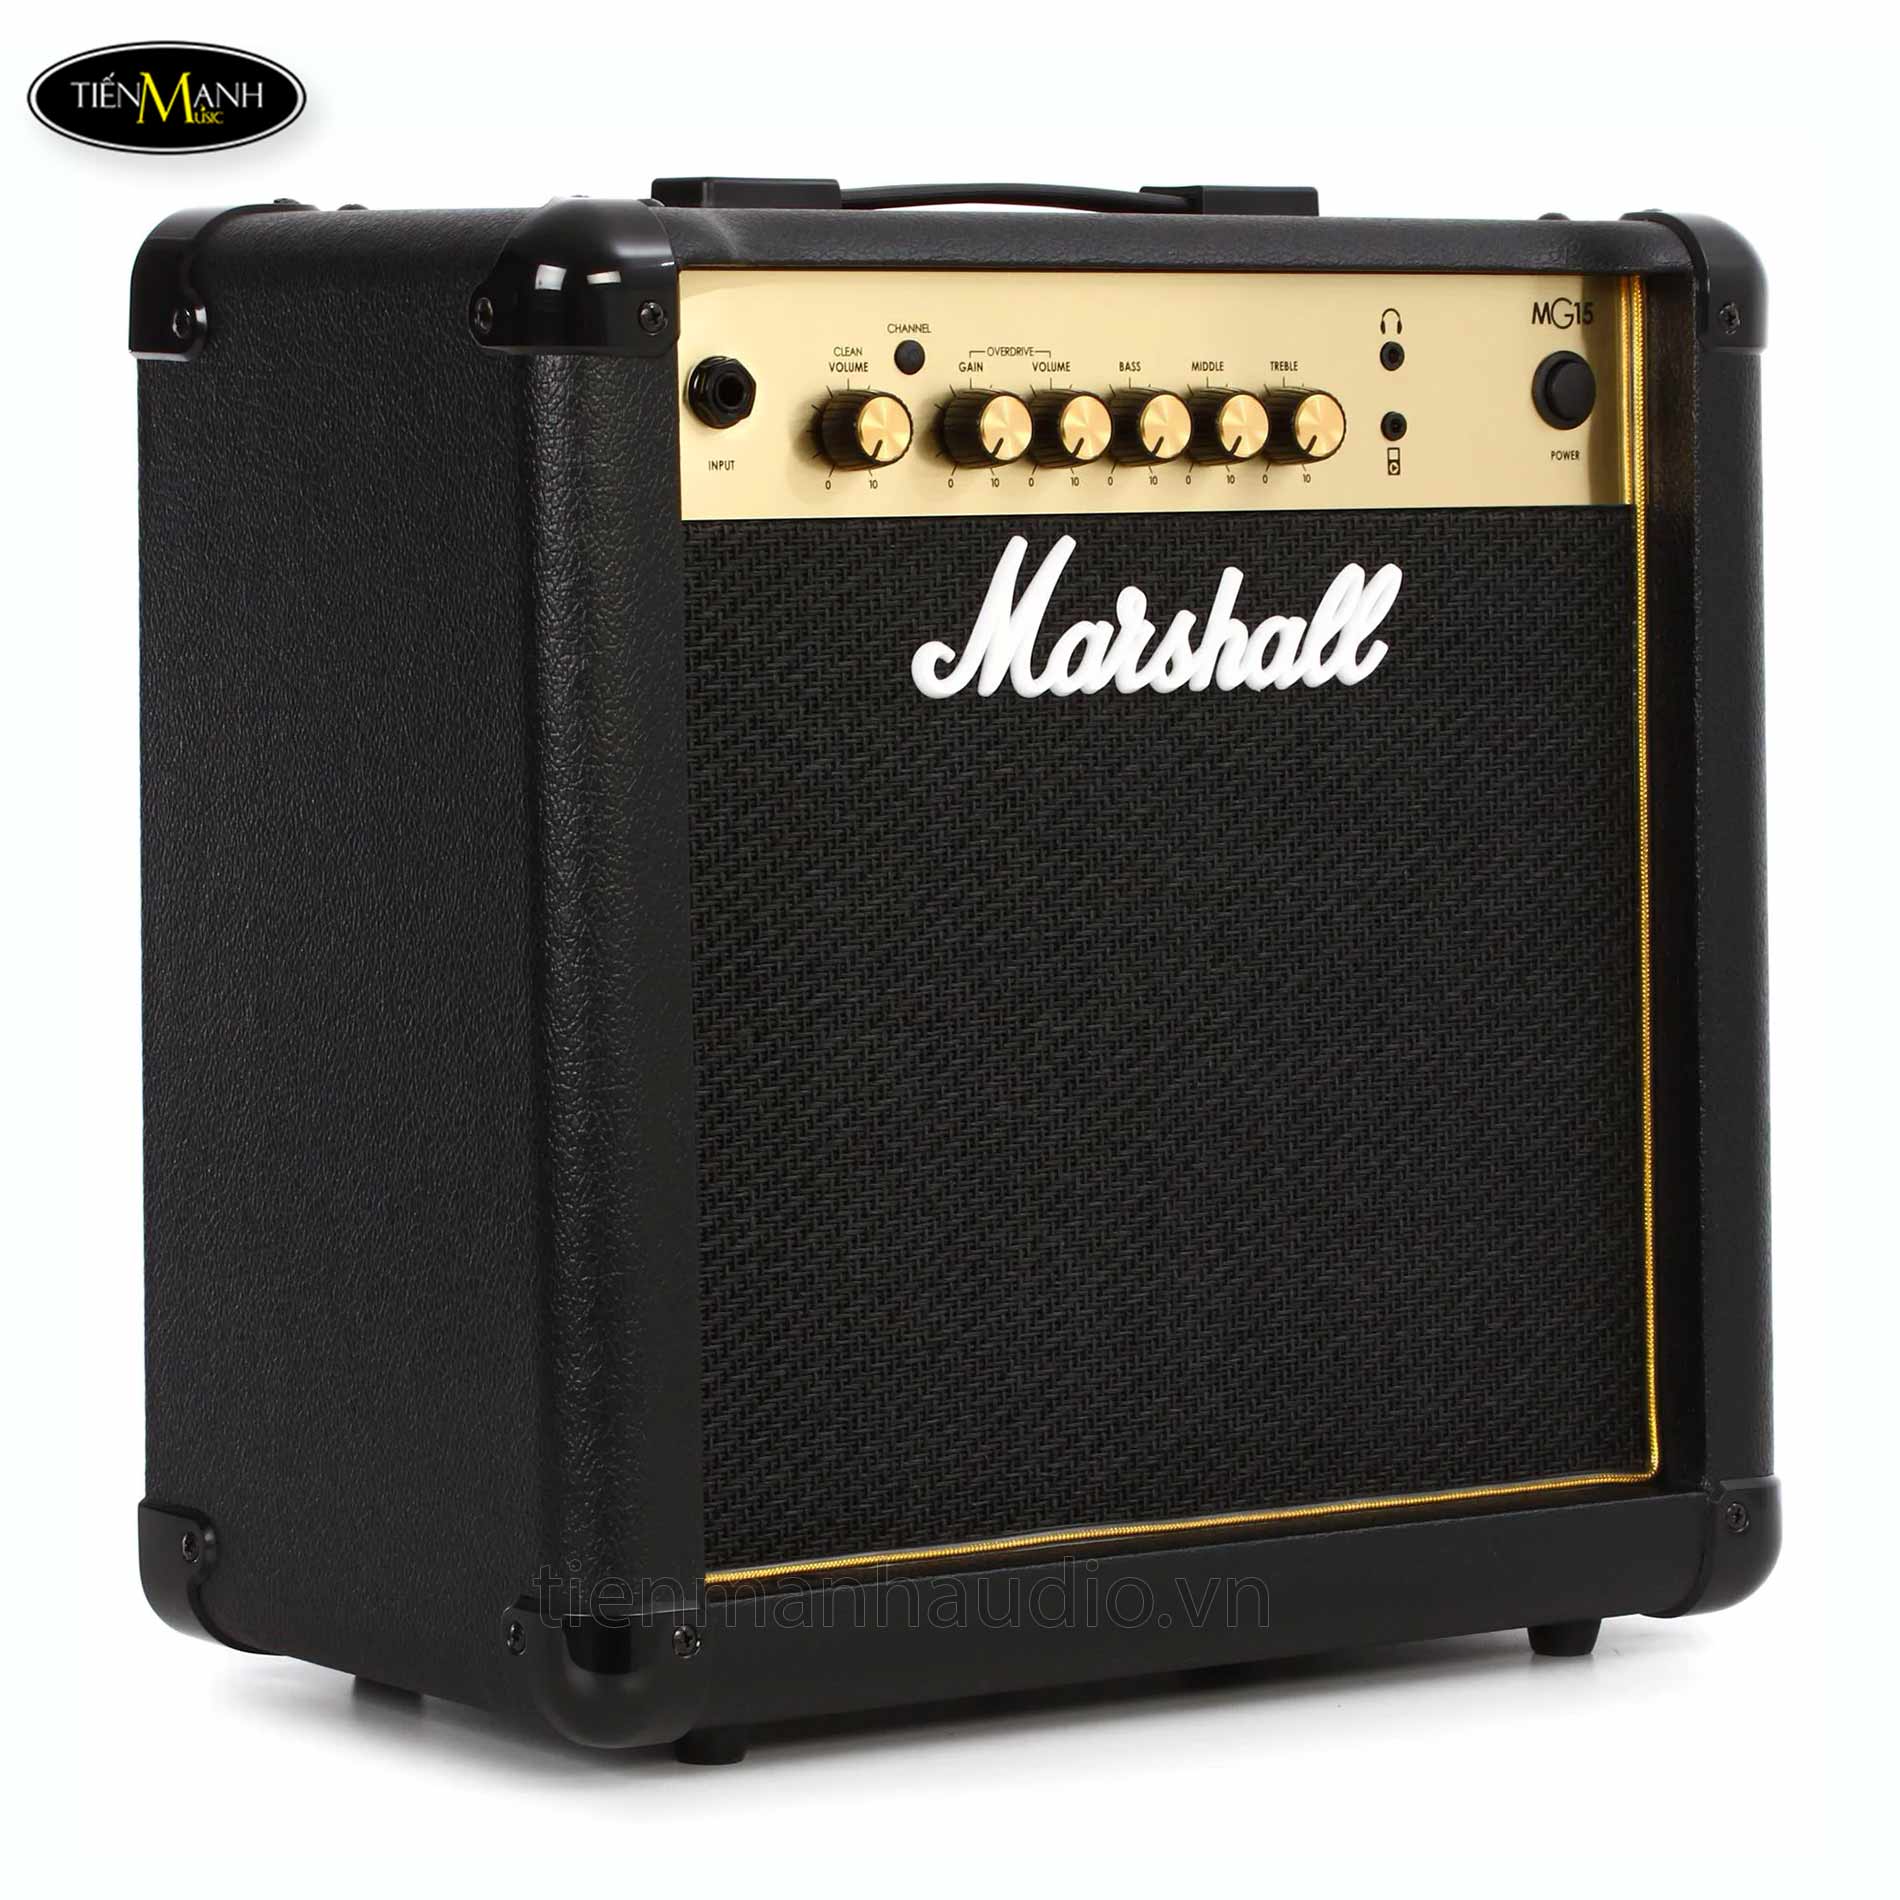 amplifier-electric-guitar-marshall-mg15g